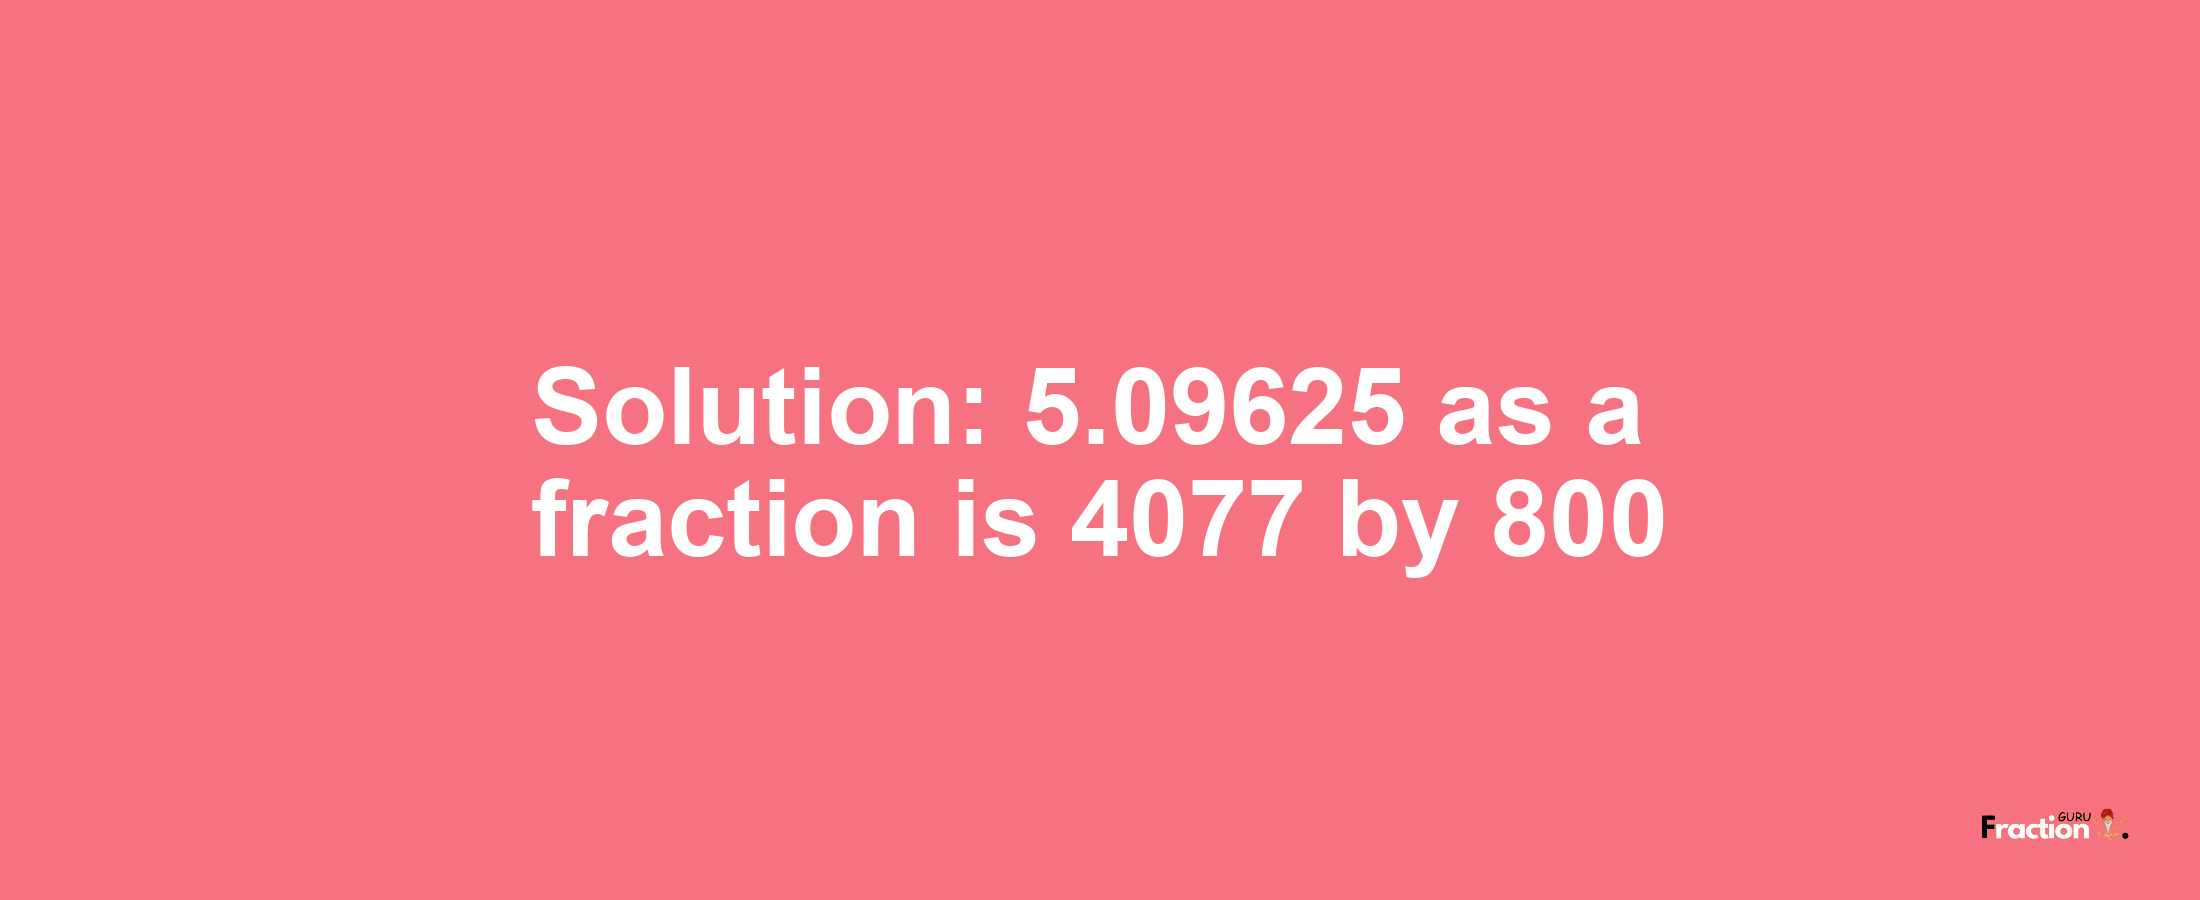 Solution:5.09625 as a fraction is 4077/800